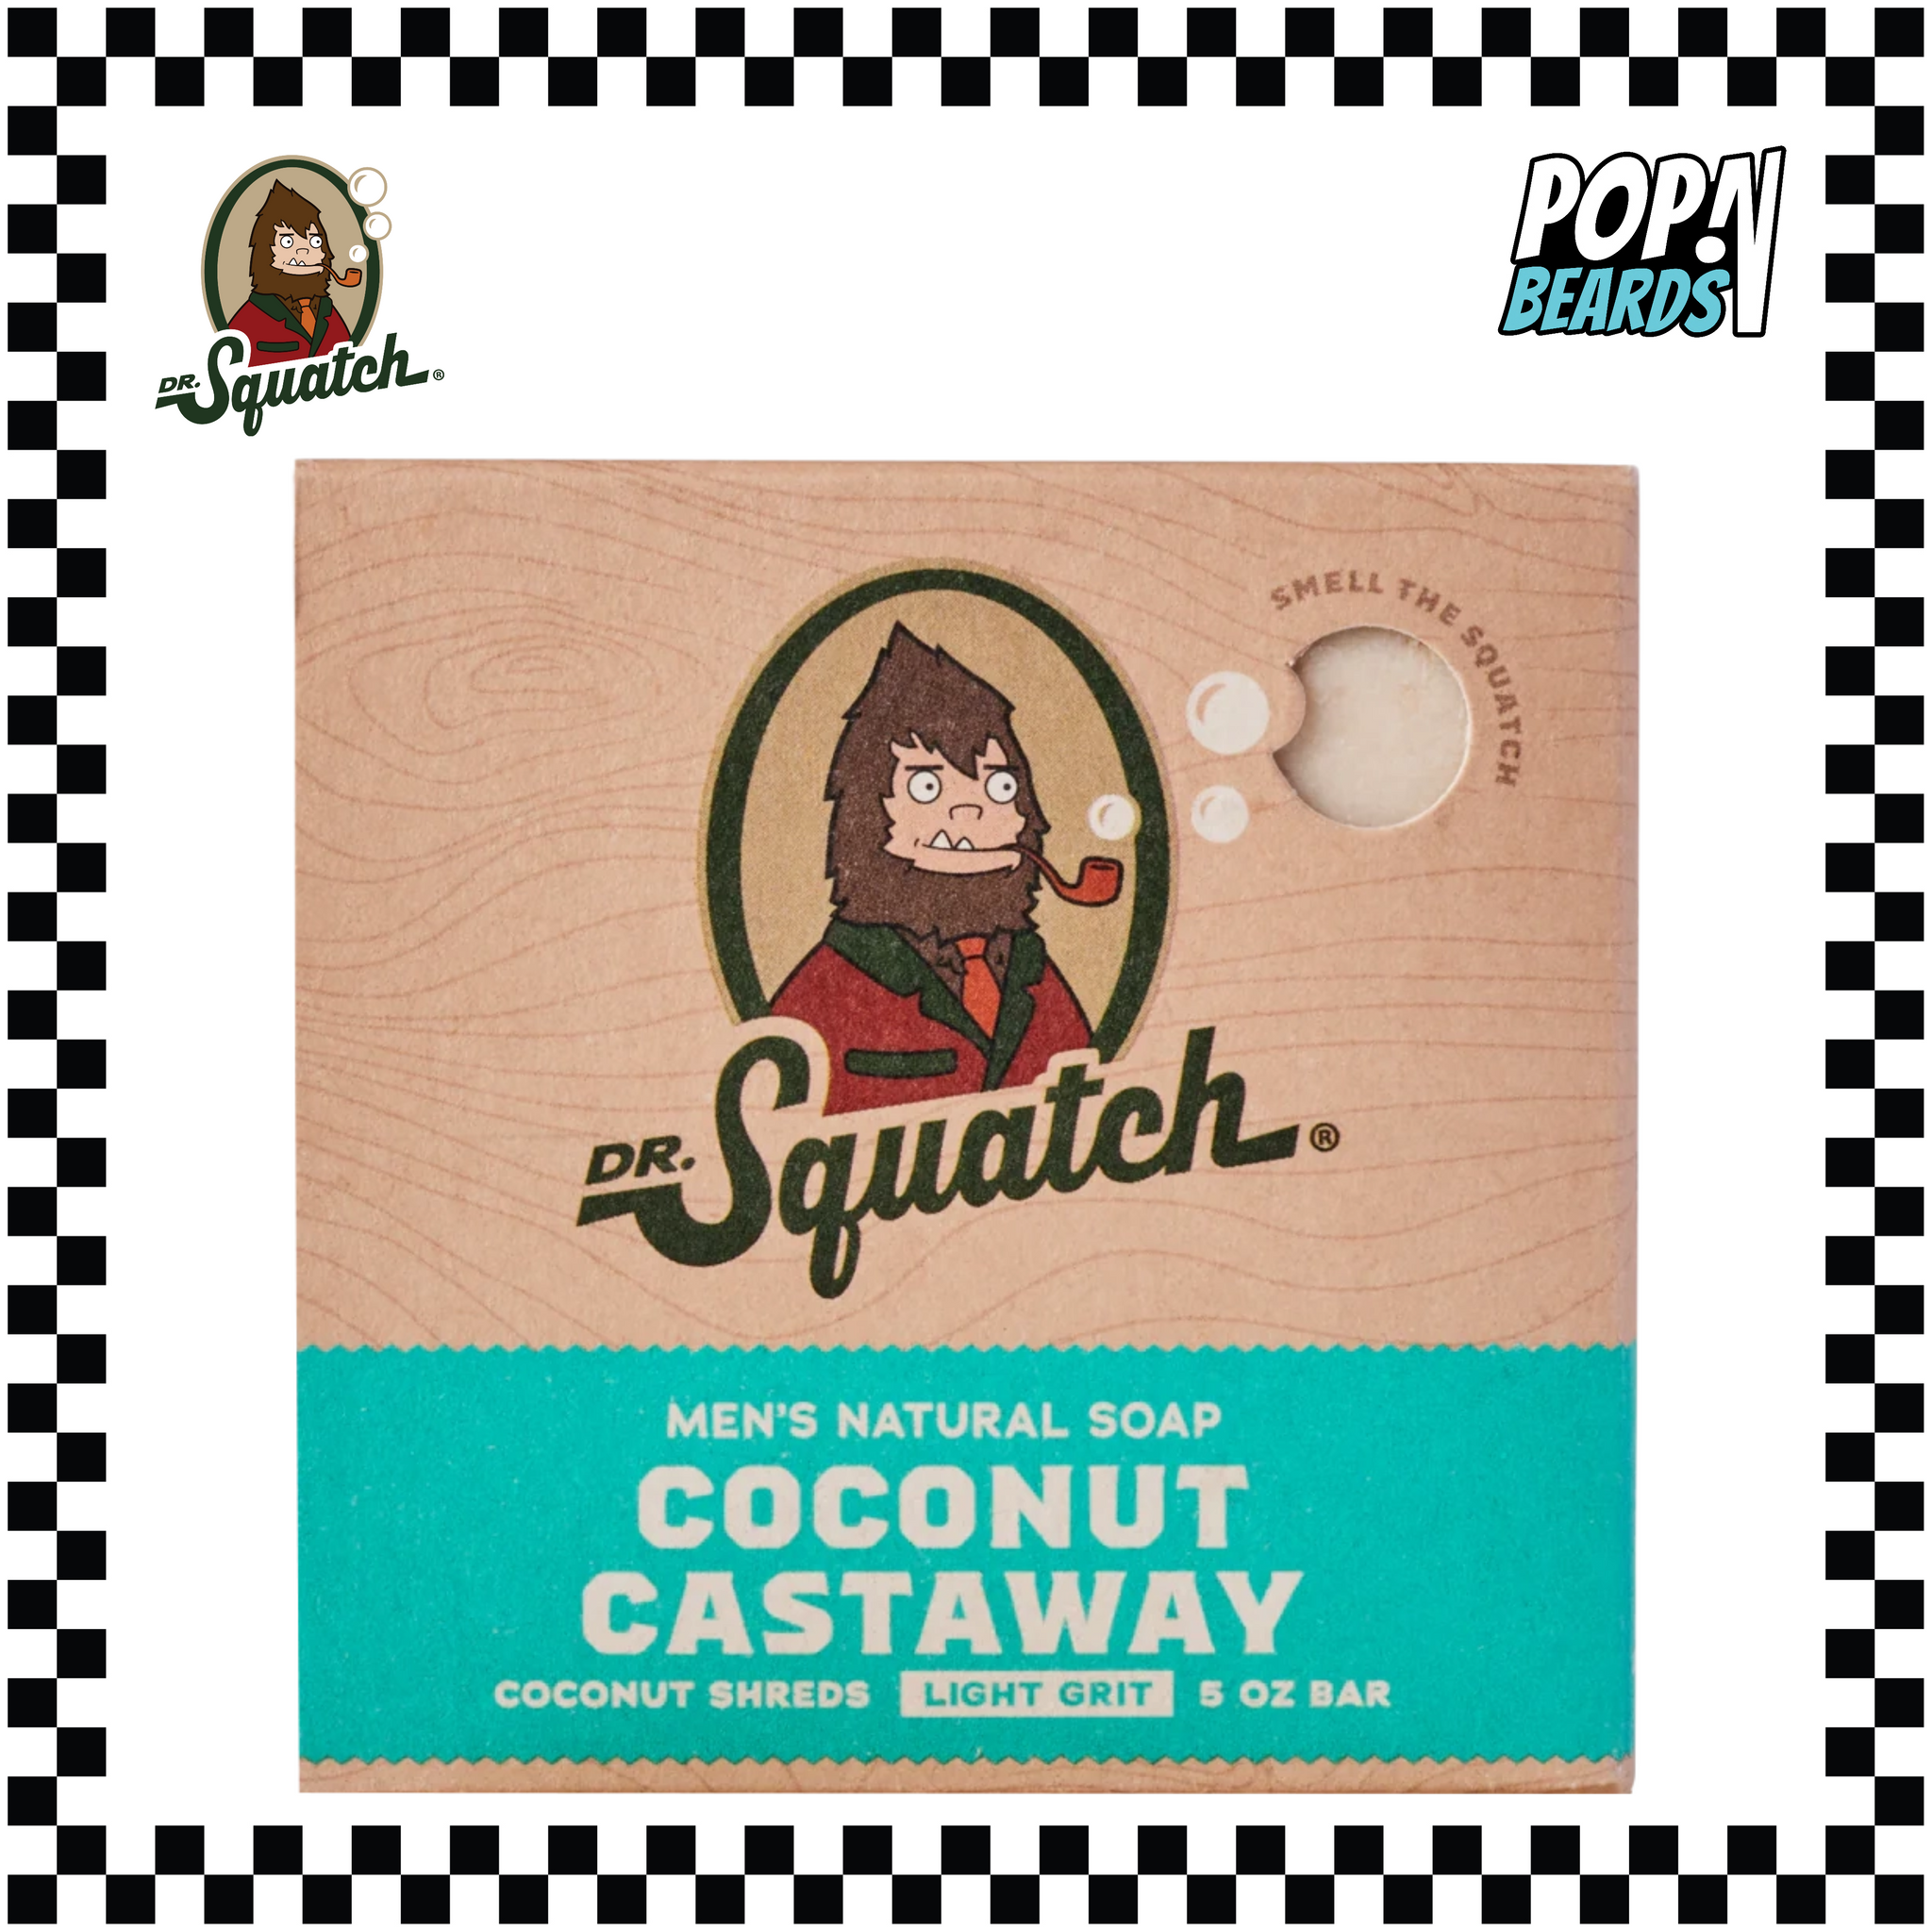 DR SQUATCH NEW SOAP - COCONUT CASTAWAY - Is real and I got a great